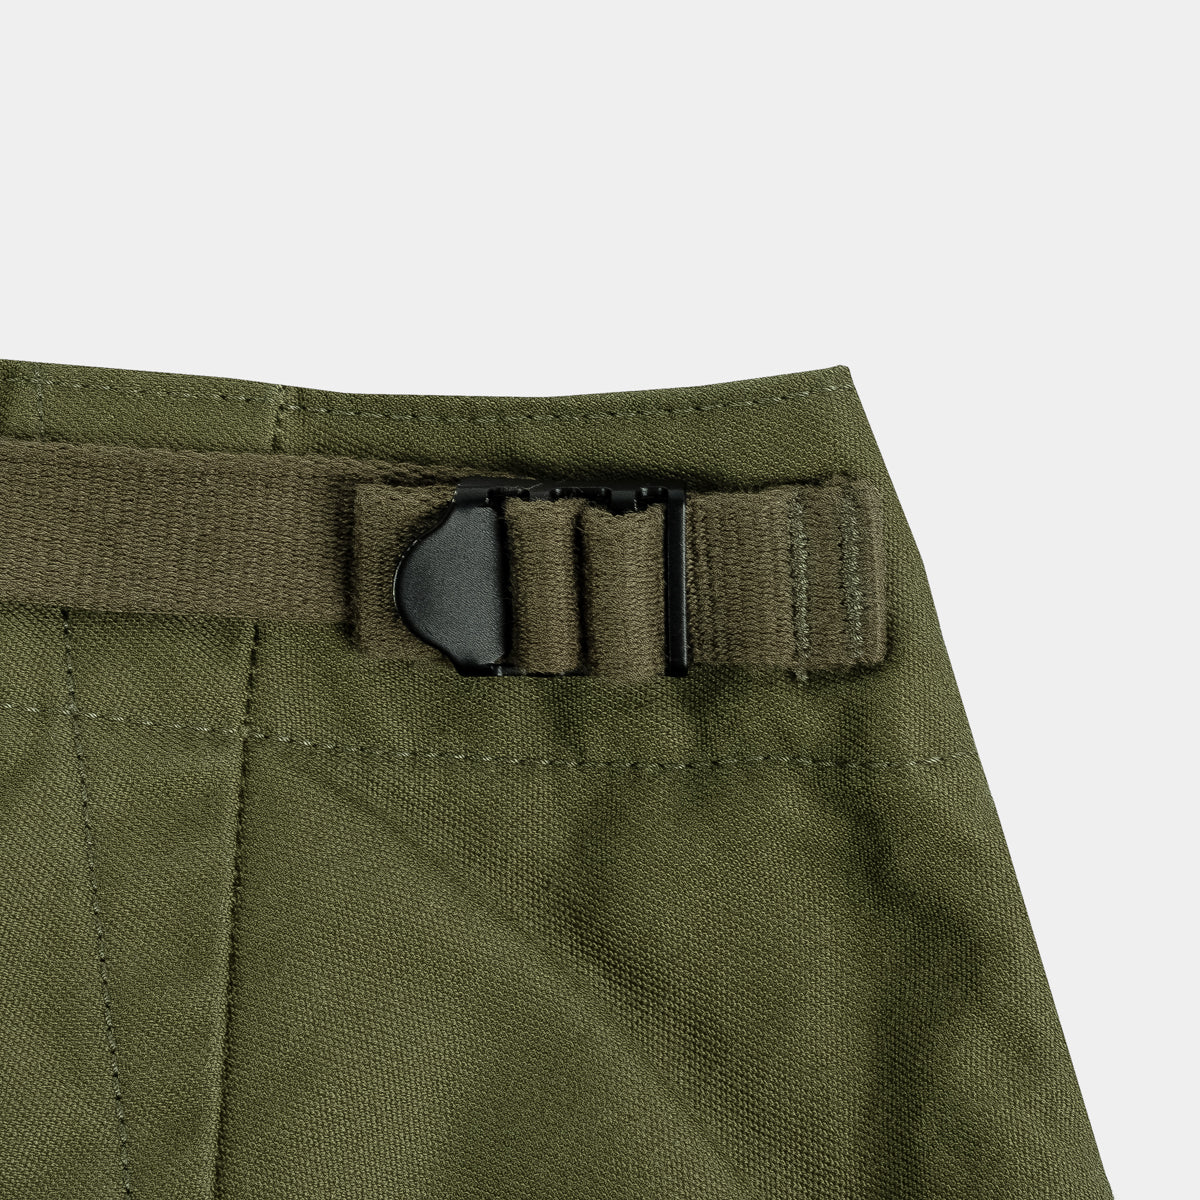 Fatigue Trousers (Mil Back Sateen) - Olive